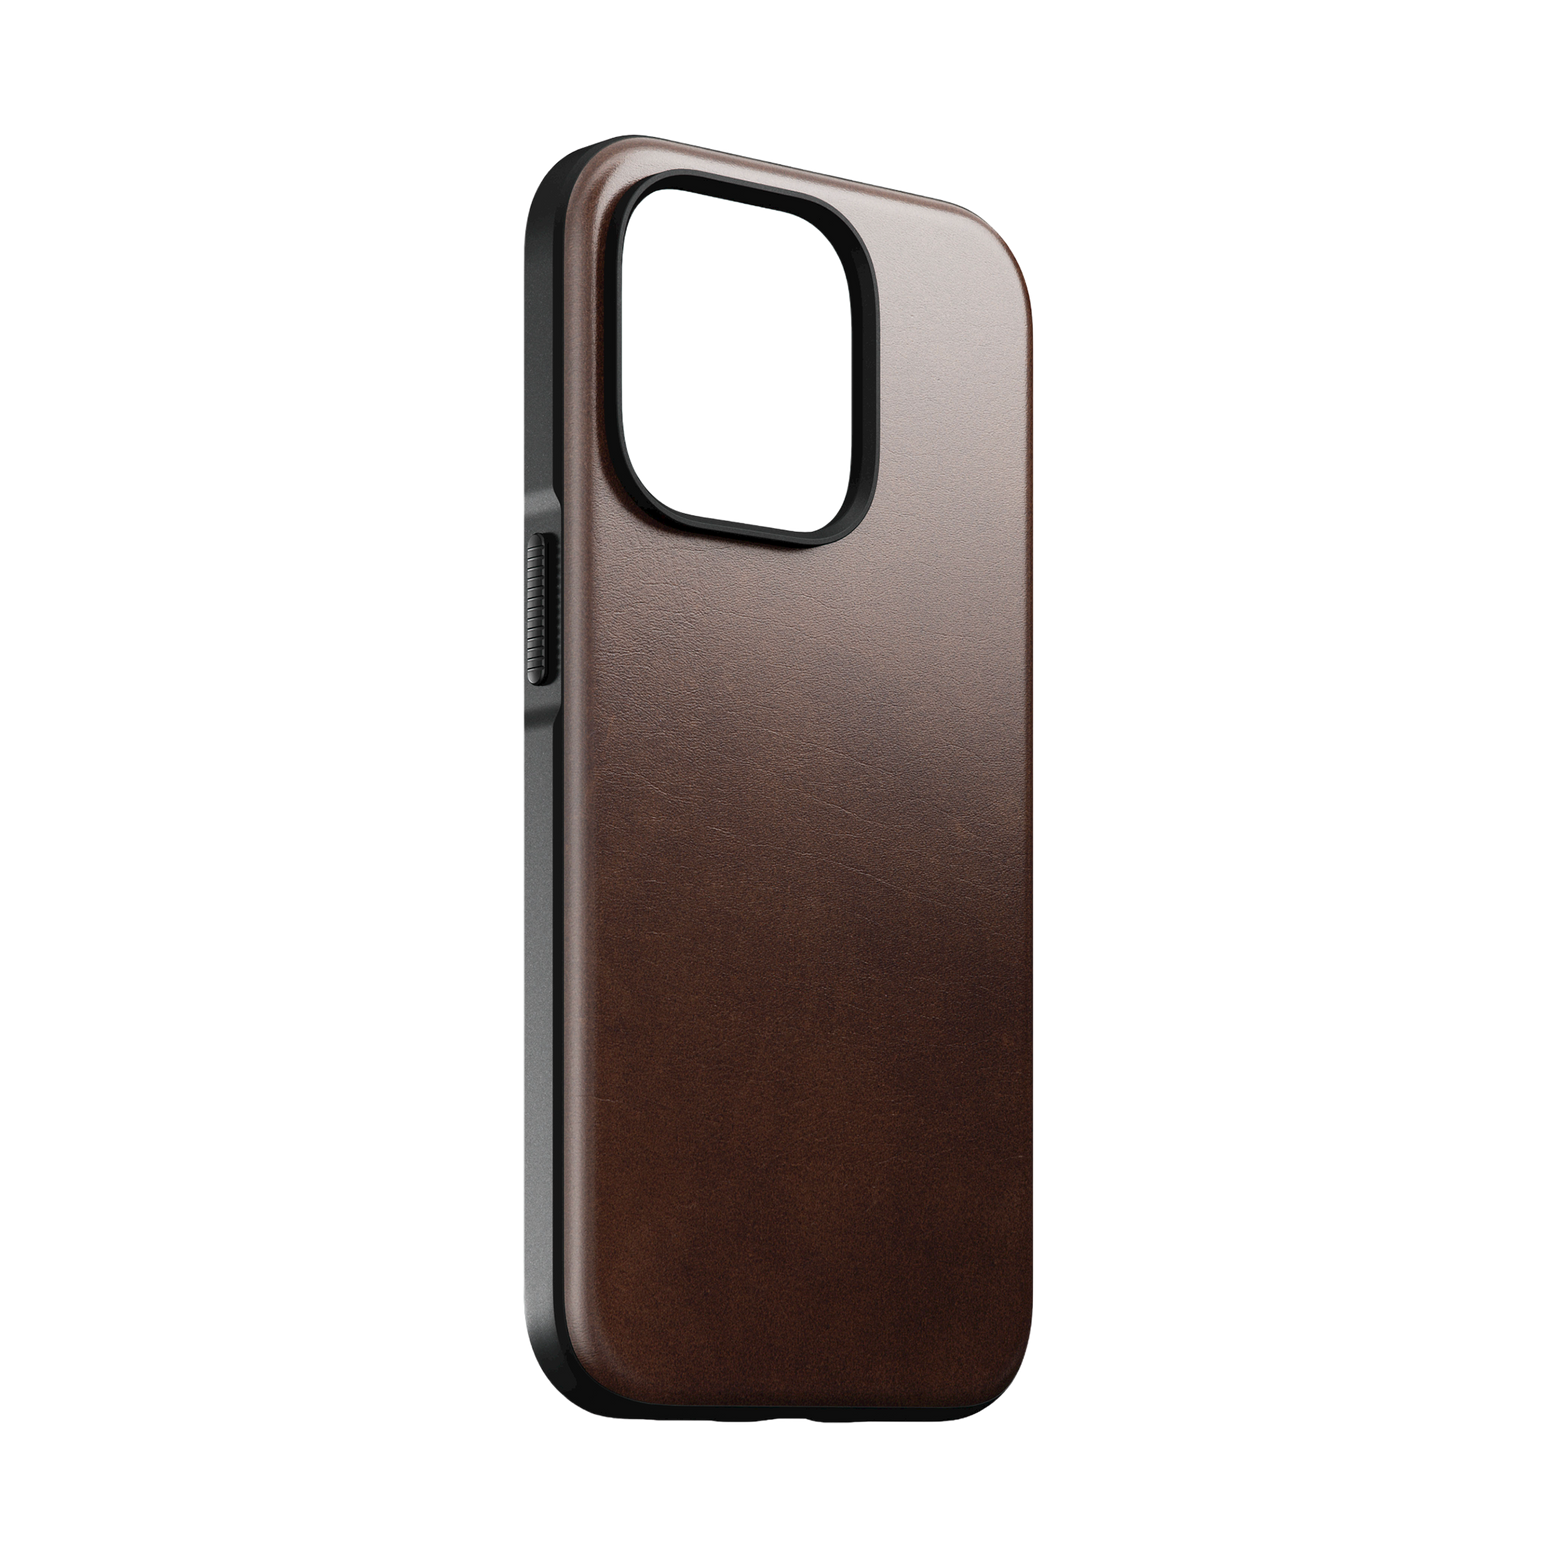 Nomad Modern Case with Horween Leather for iPhone 14 Pro - Rustic Brown - Discontinued